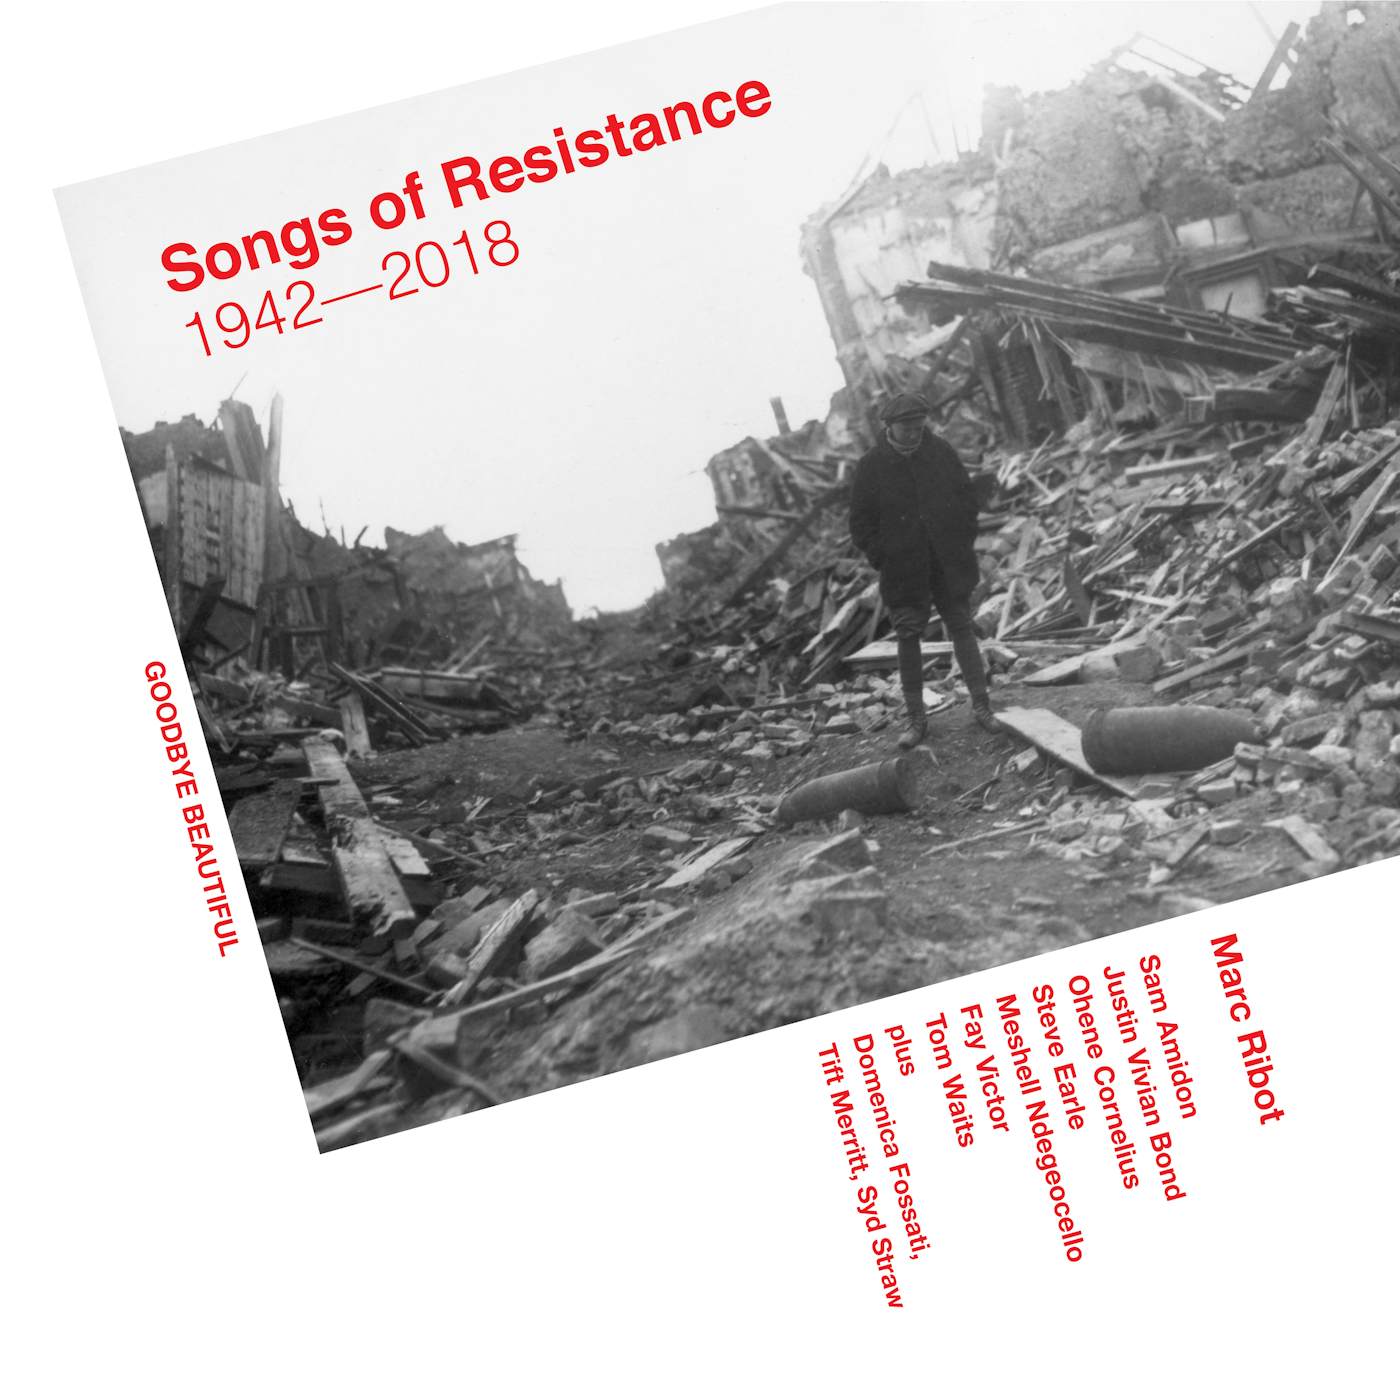 Marc Ribot SONGS OF RESISTANCE 1942-2018 CD